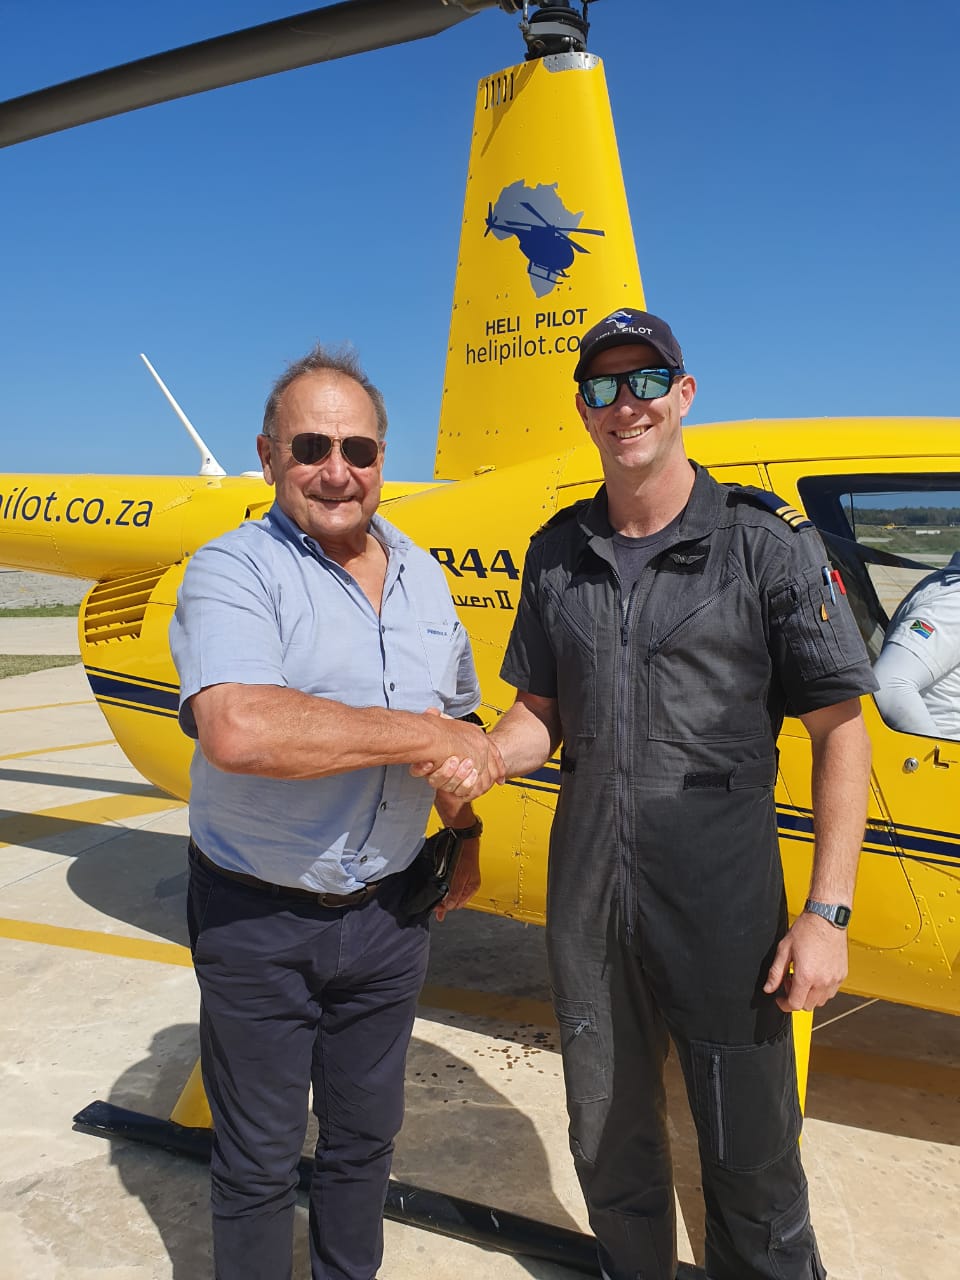 You are currently viewing Congratulations to Jean-Pierre Joubert who completed his CPL & Instructors Rating on 18/11/2019.